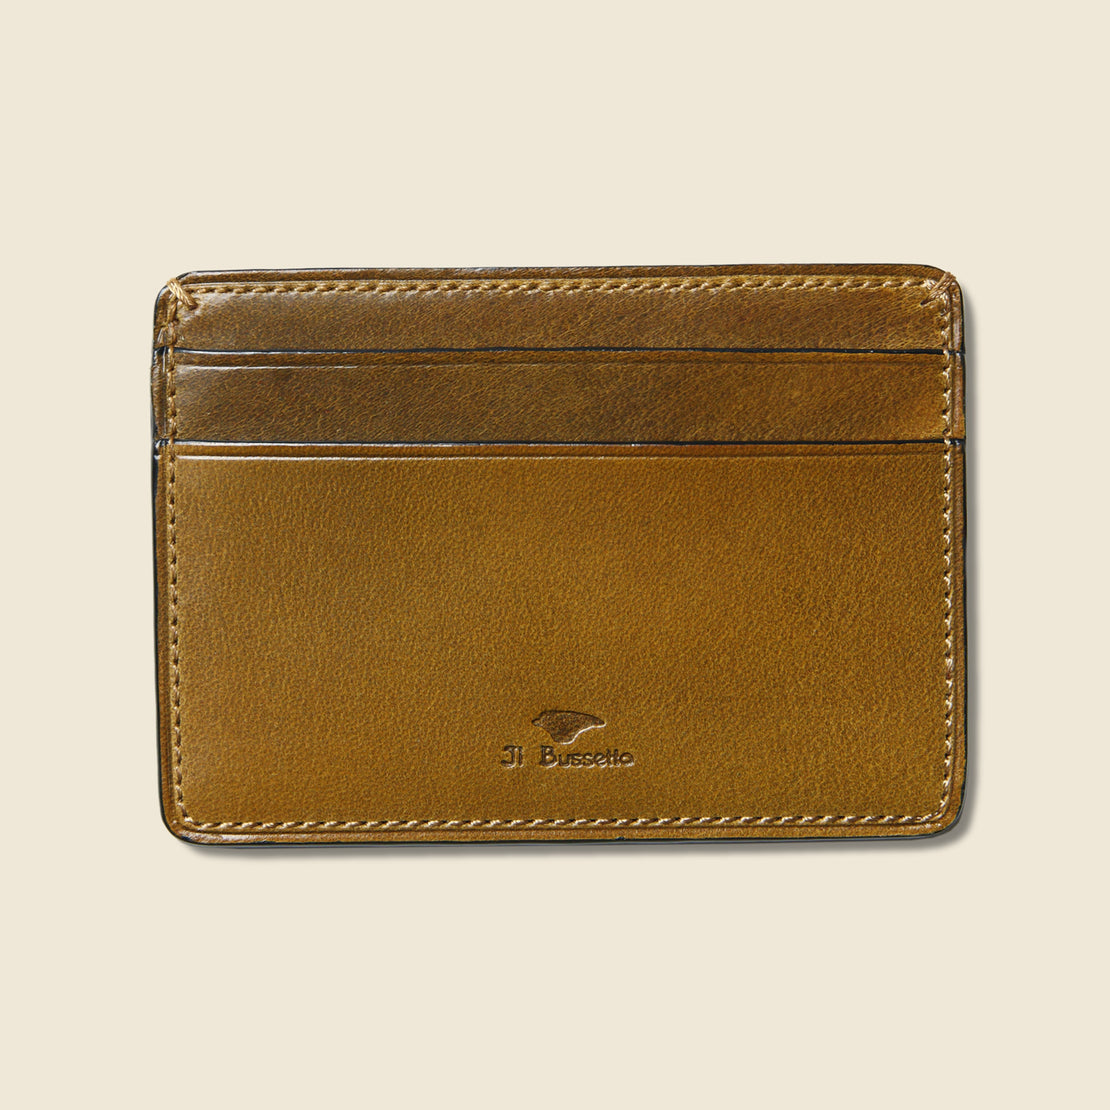 Il Bussetto Credit Card Case - Light Brown